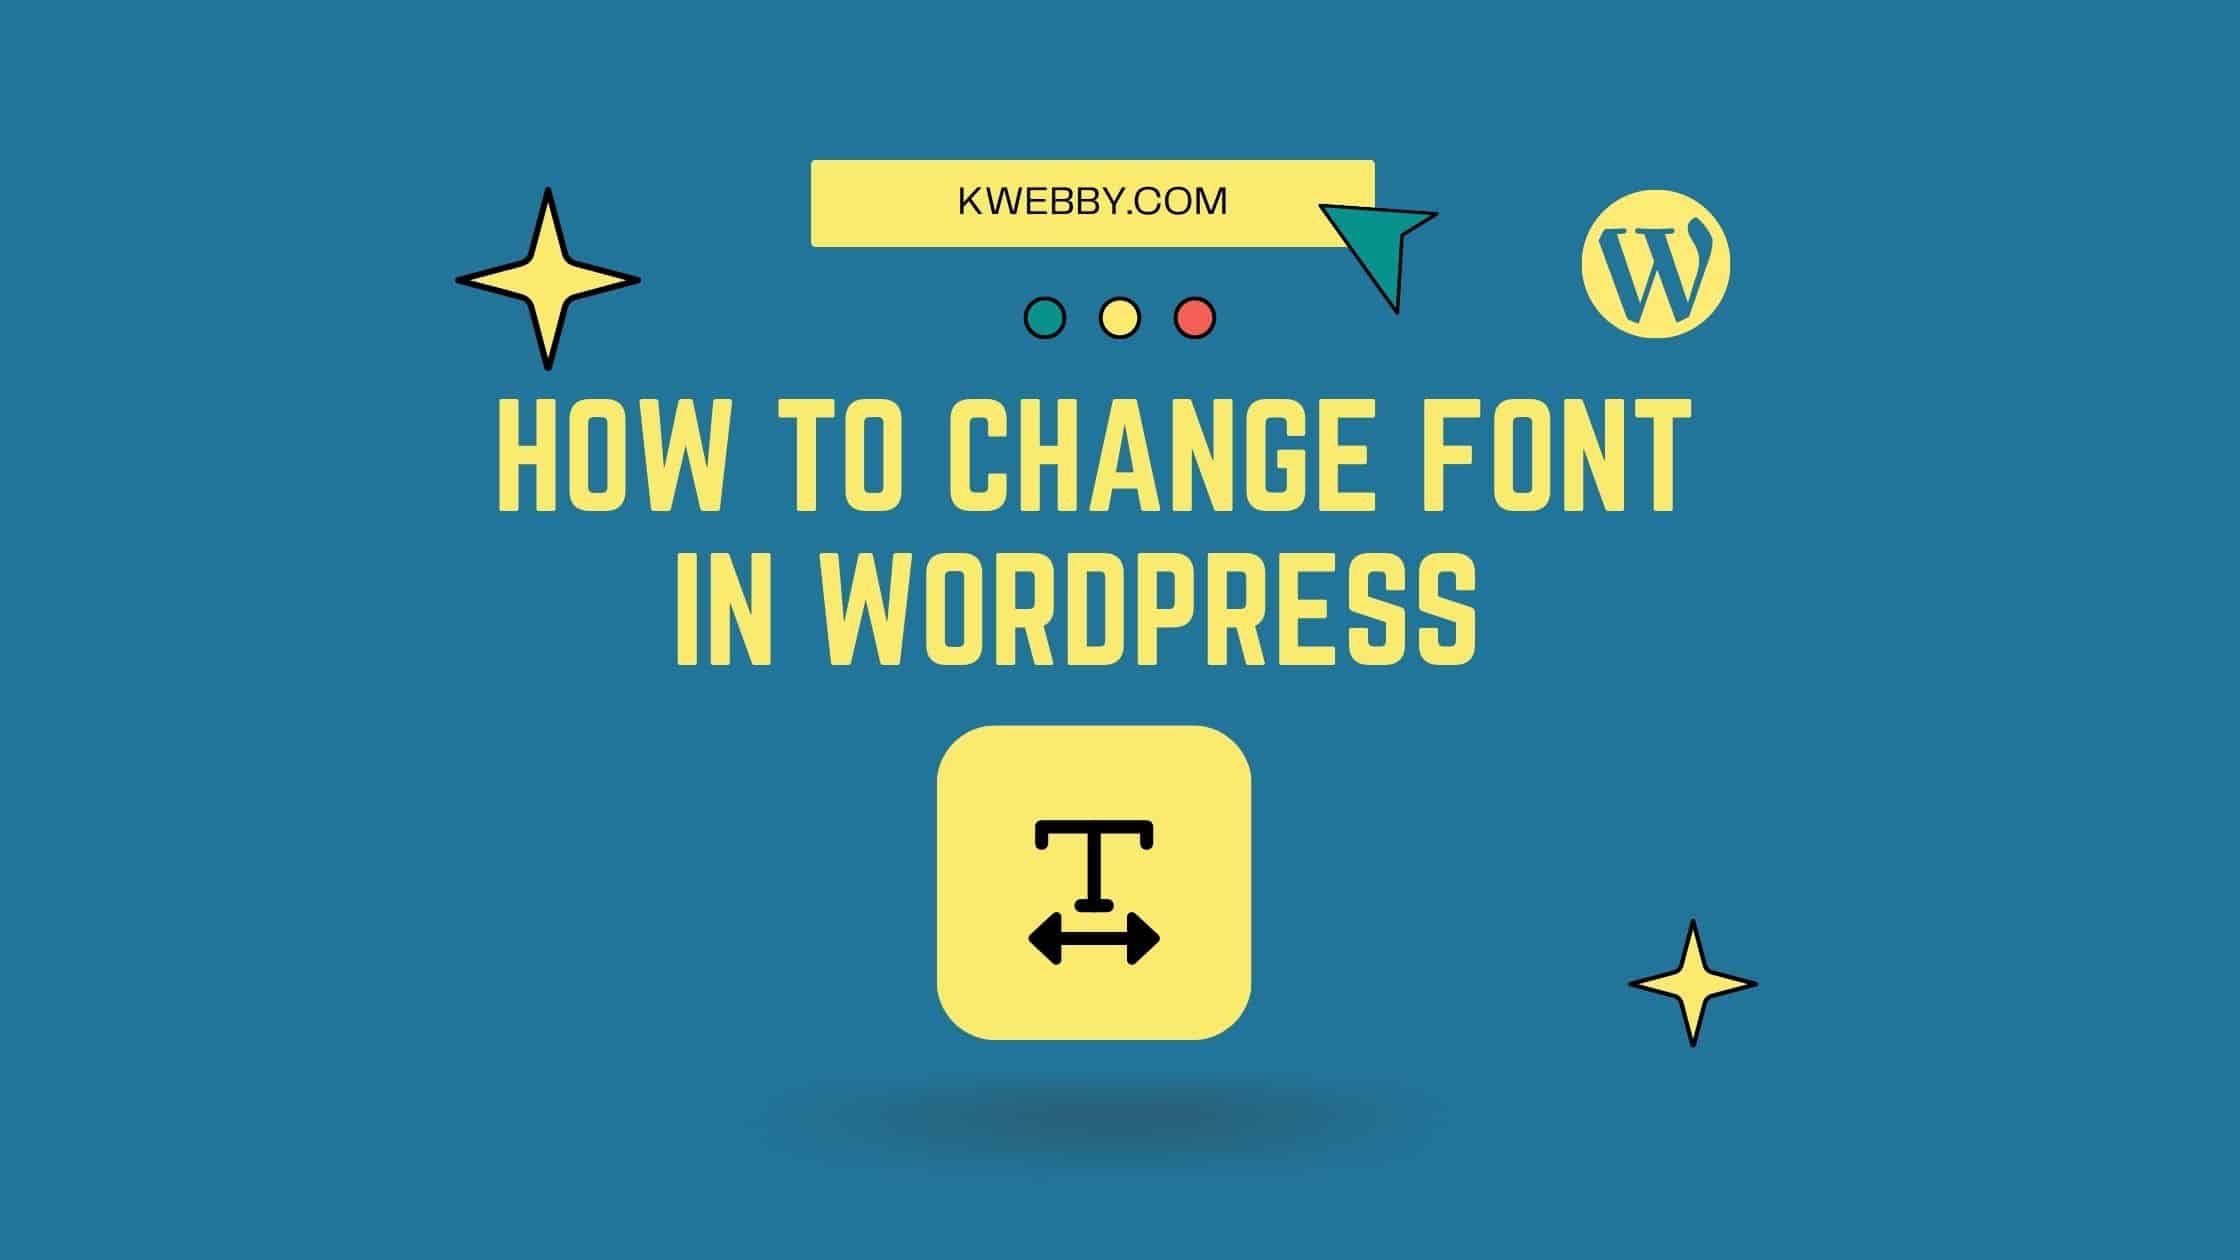 How to Change Font in WordPress? Try These 3 Easy Steps